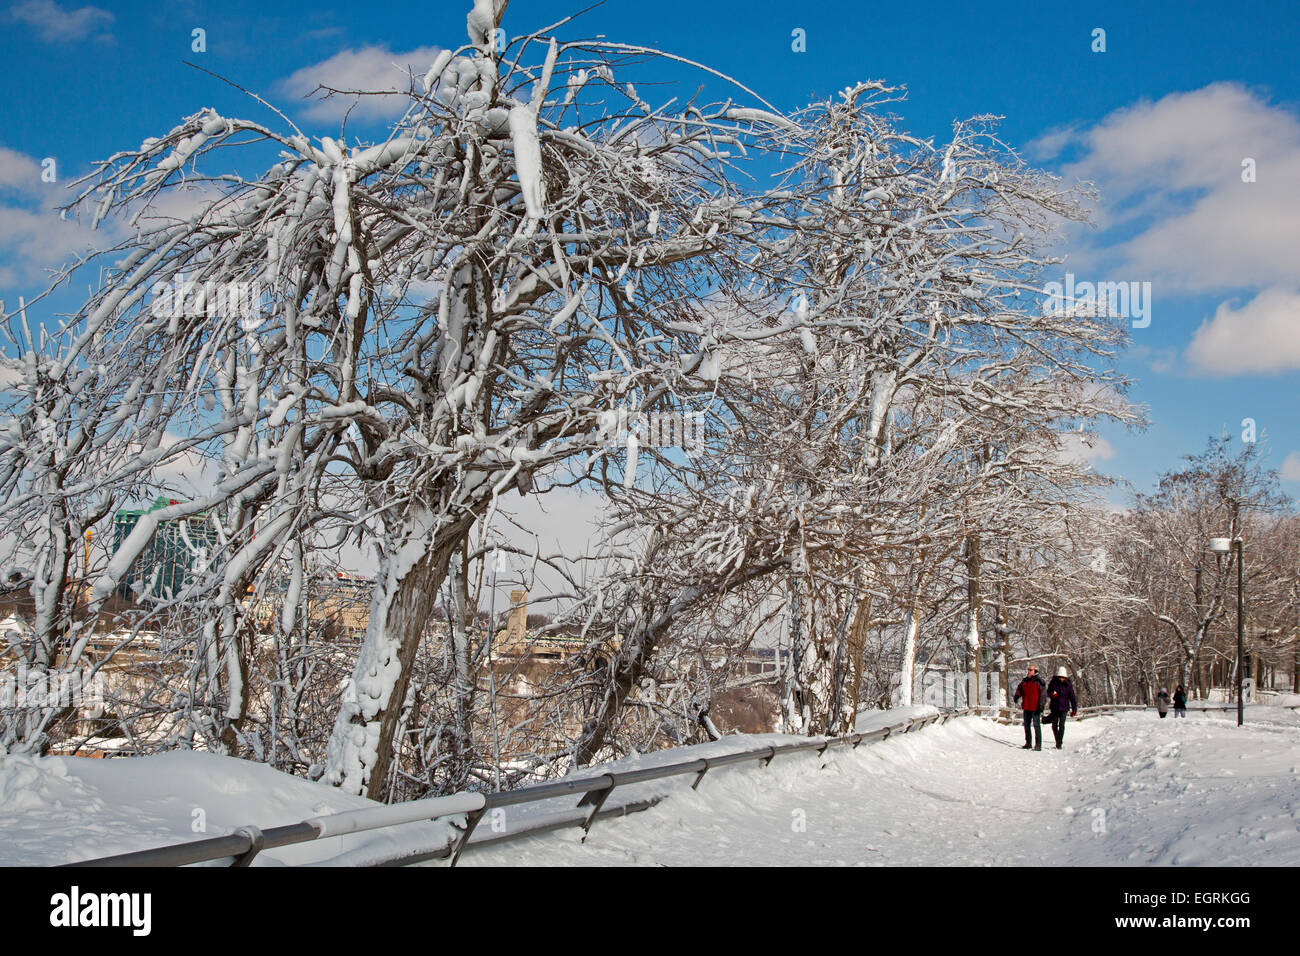 Niagara Falls, New York - Visitors to Niagara Falls State Park walk past trees coated with ice from the Falls. Stock Photo